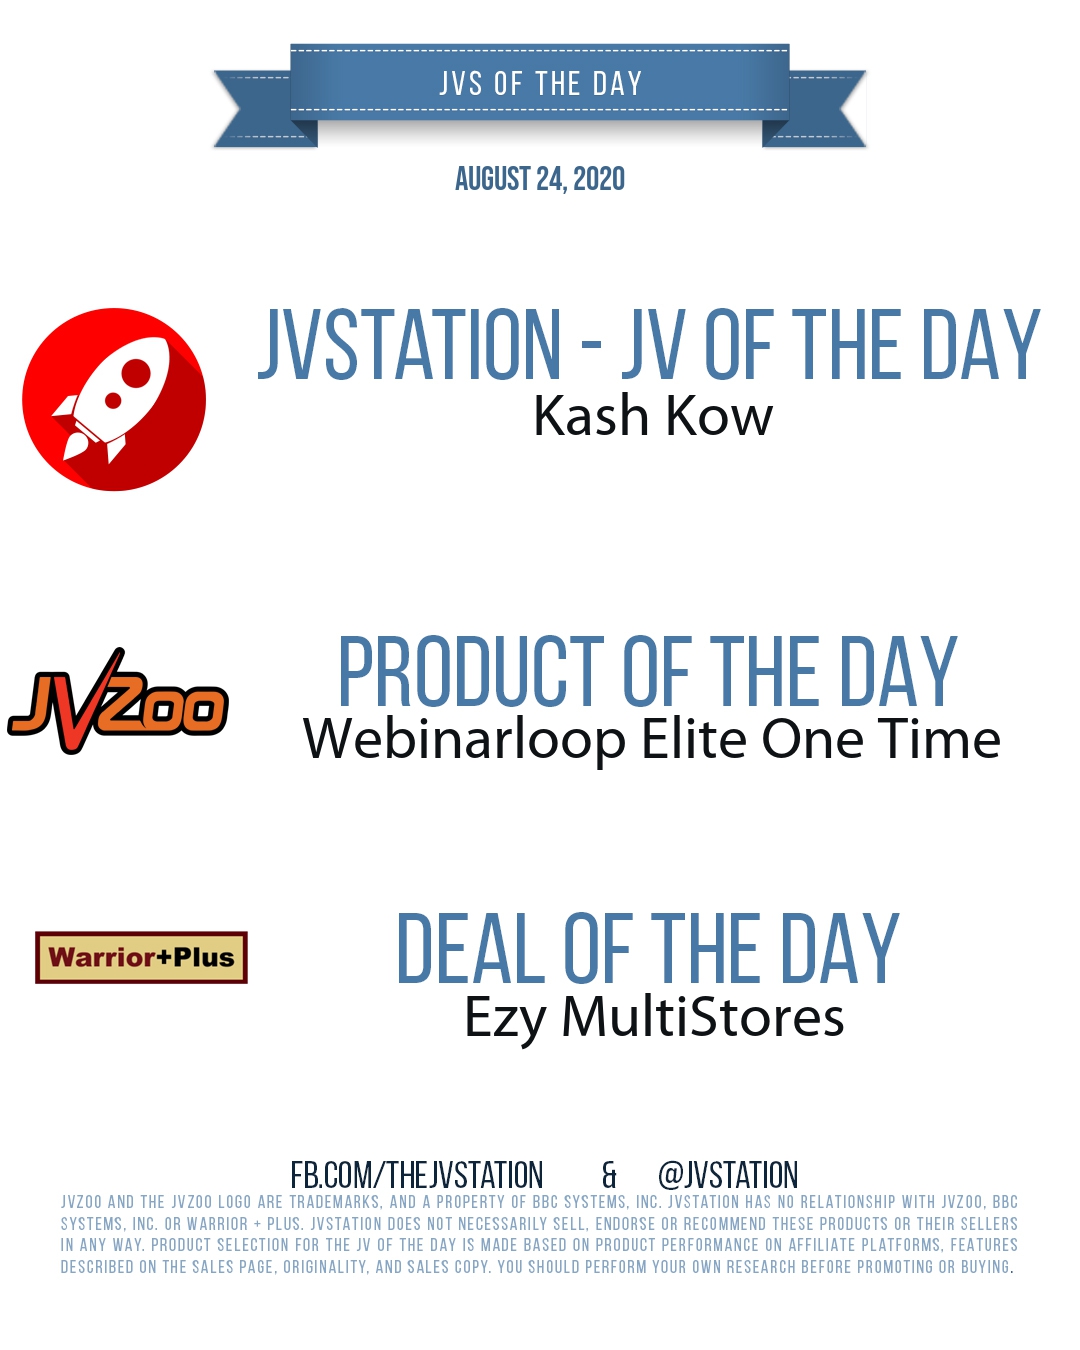 JVs of the day - August 24, 2020